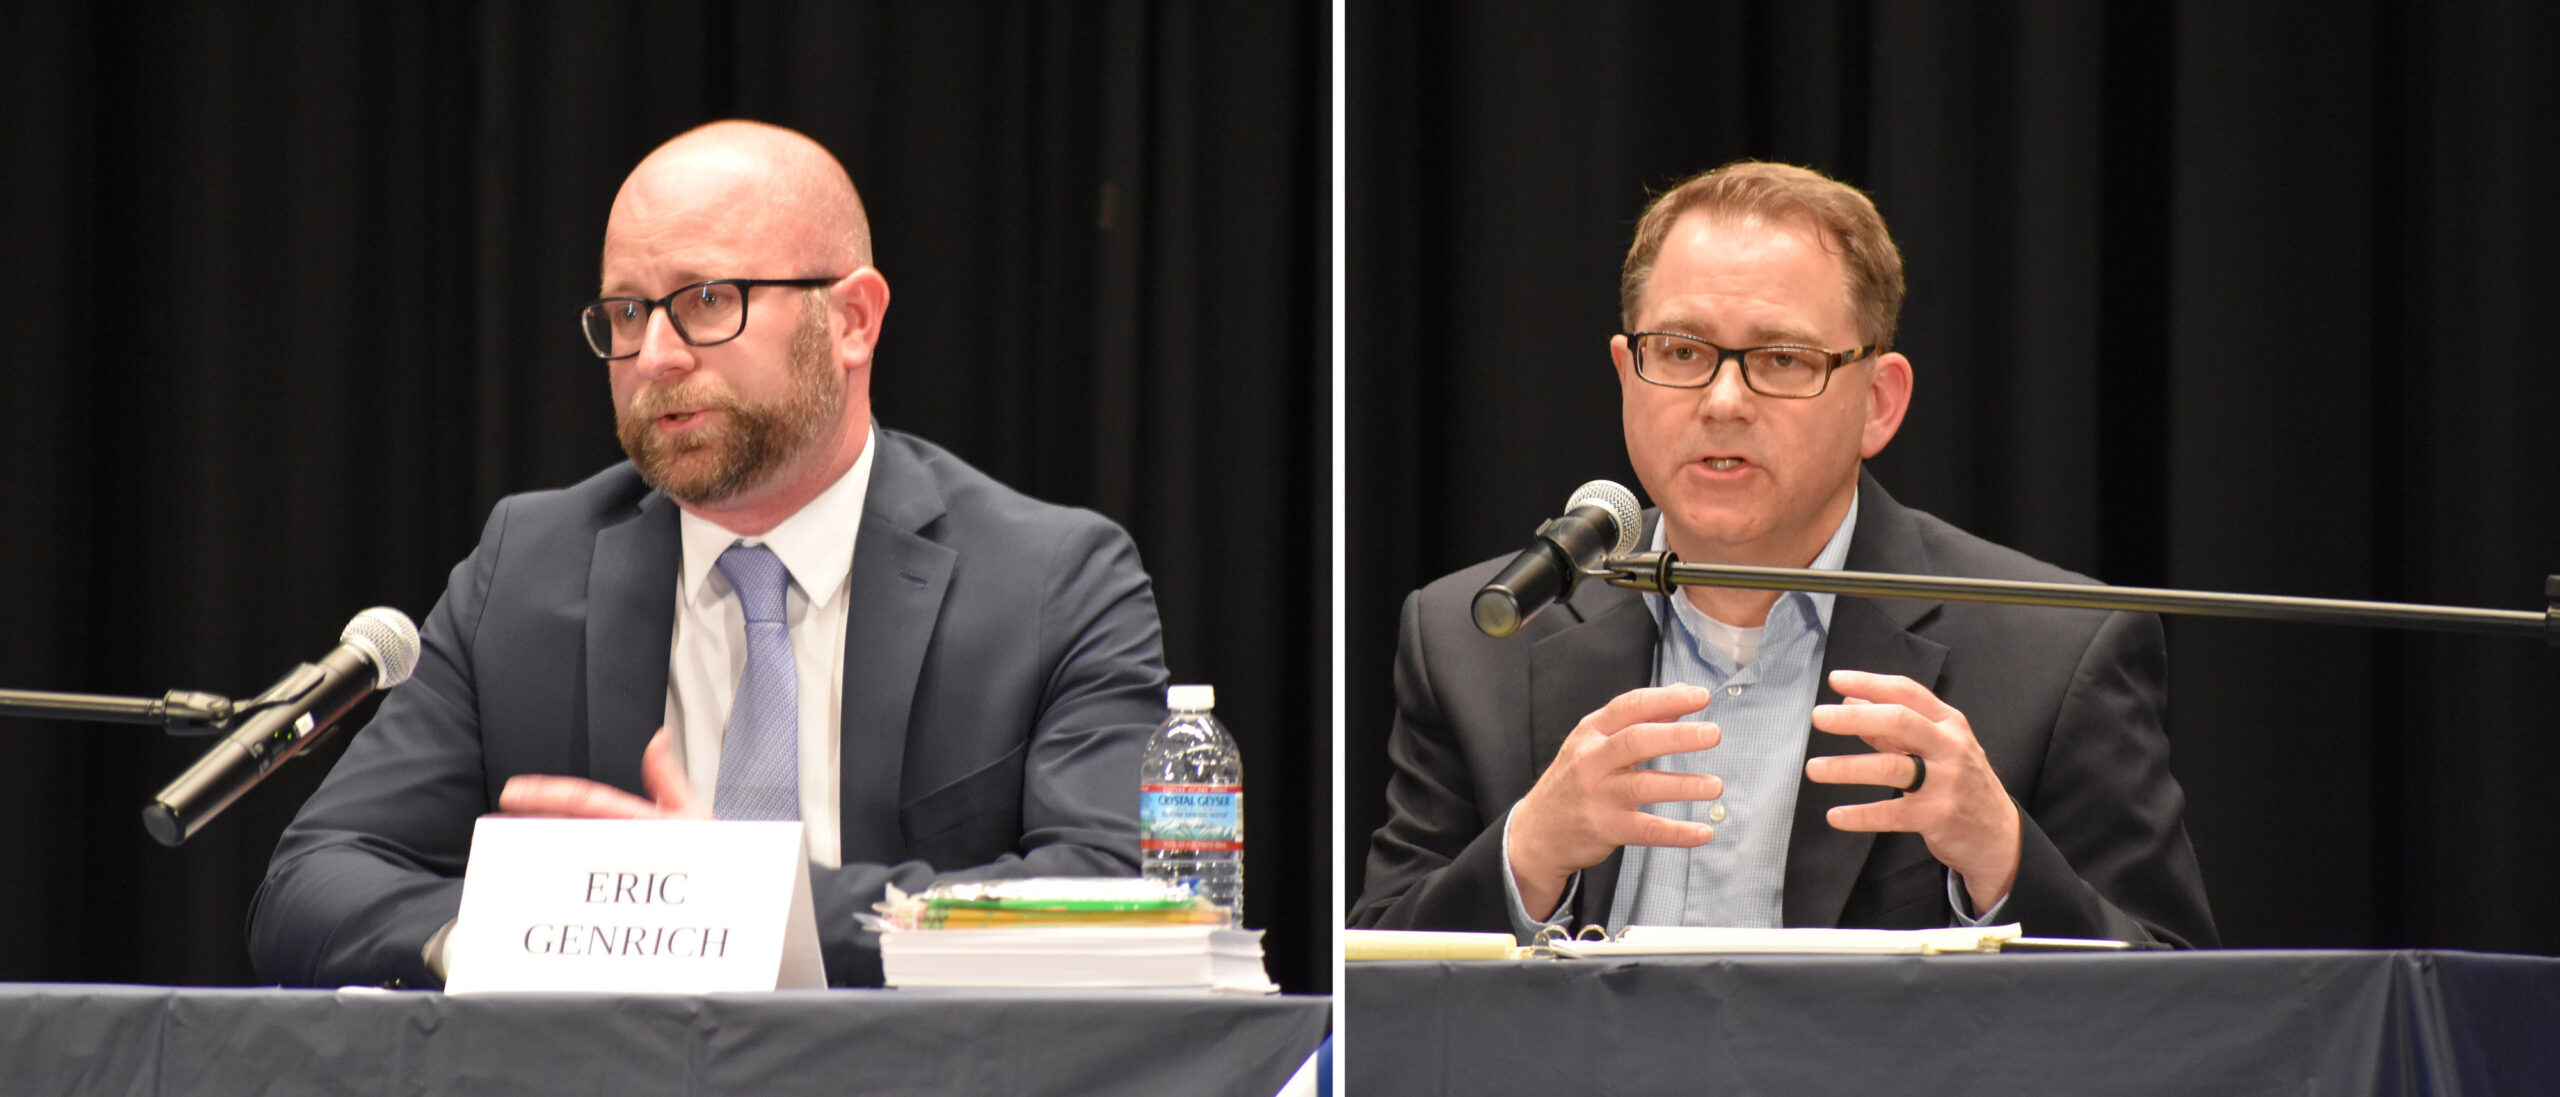 Incumbent Green Bay Mayor Eric Genrich and Chad Weininger will face off in the April 4 election.